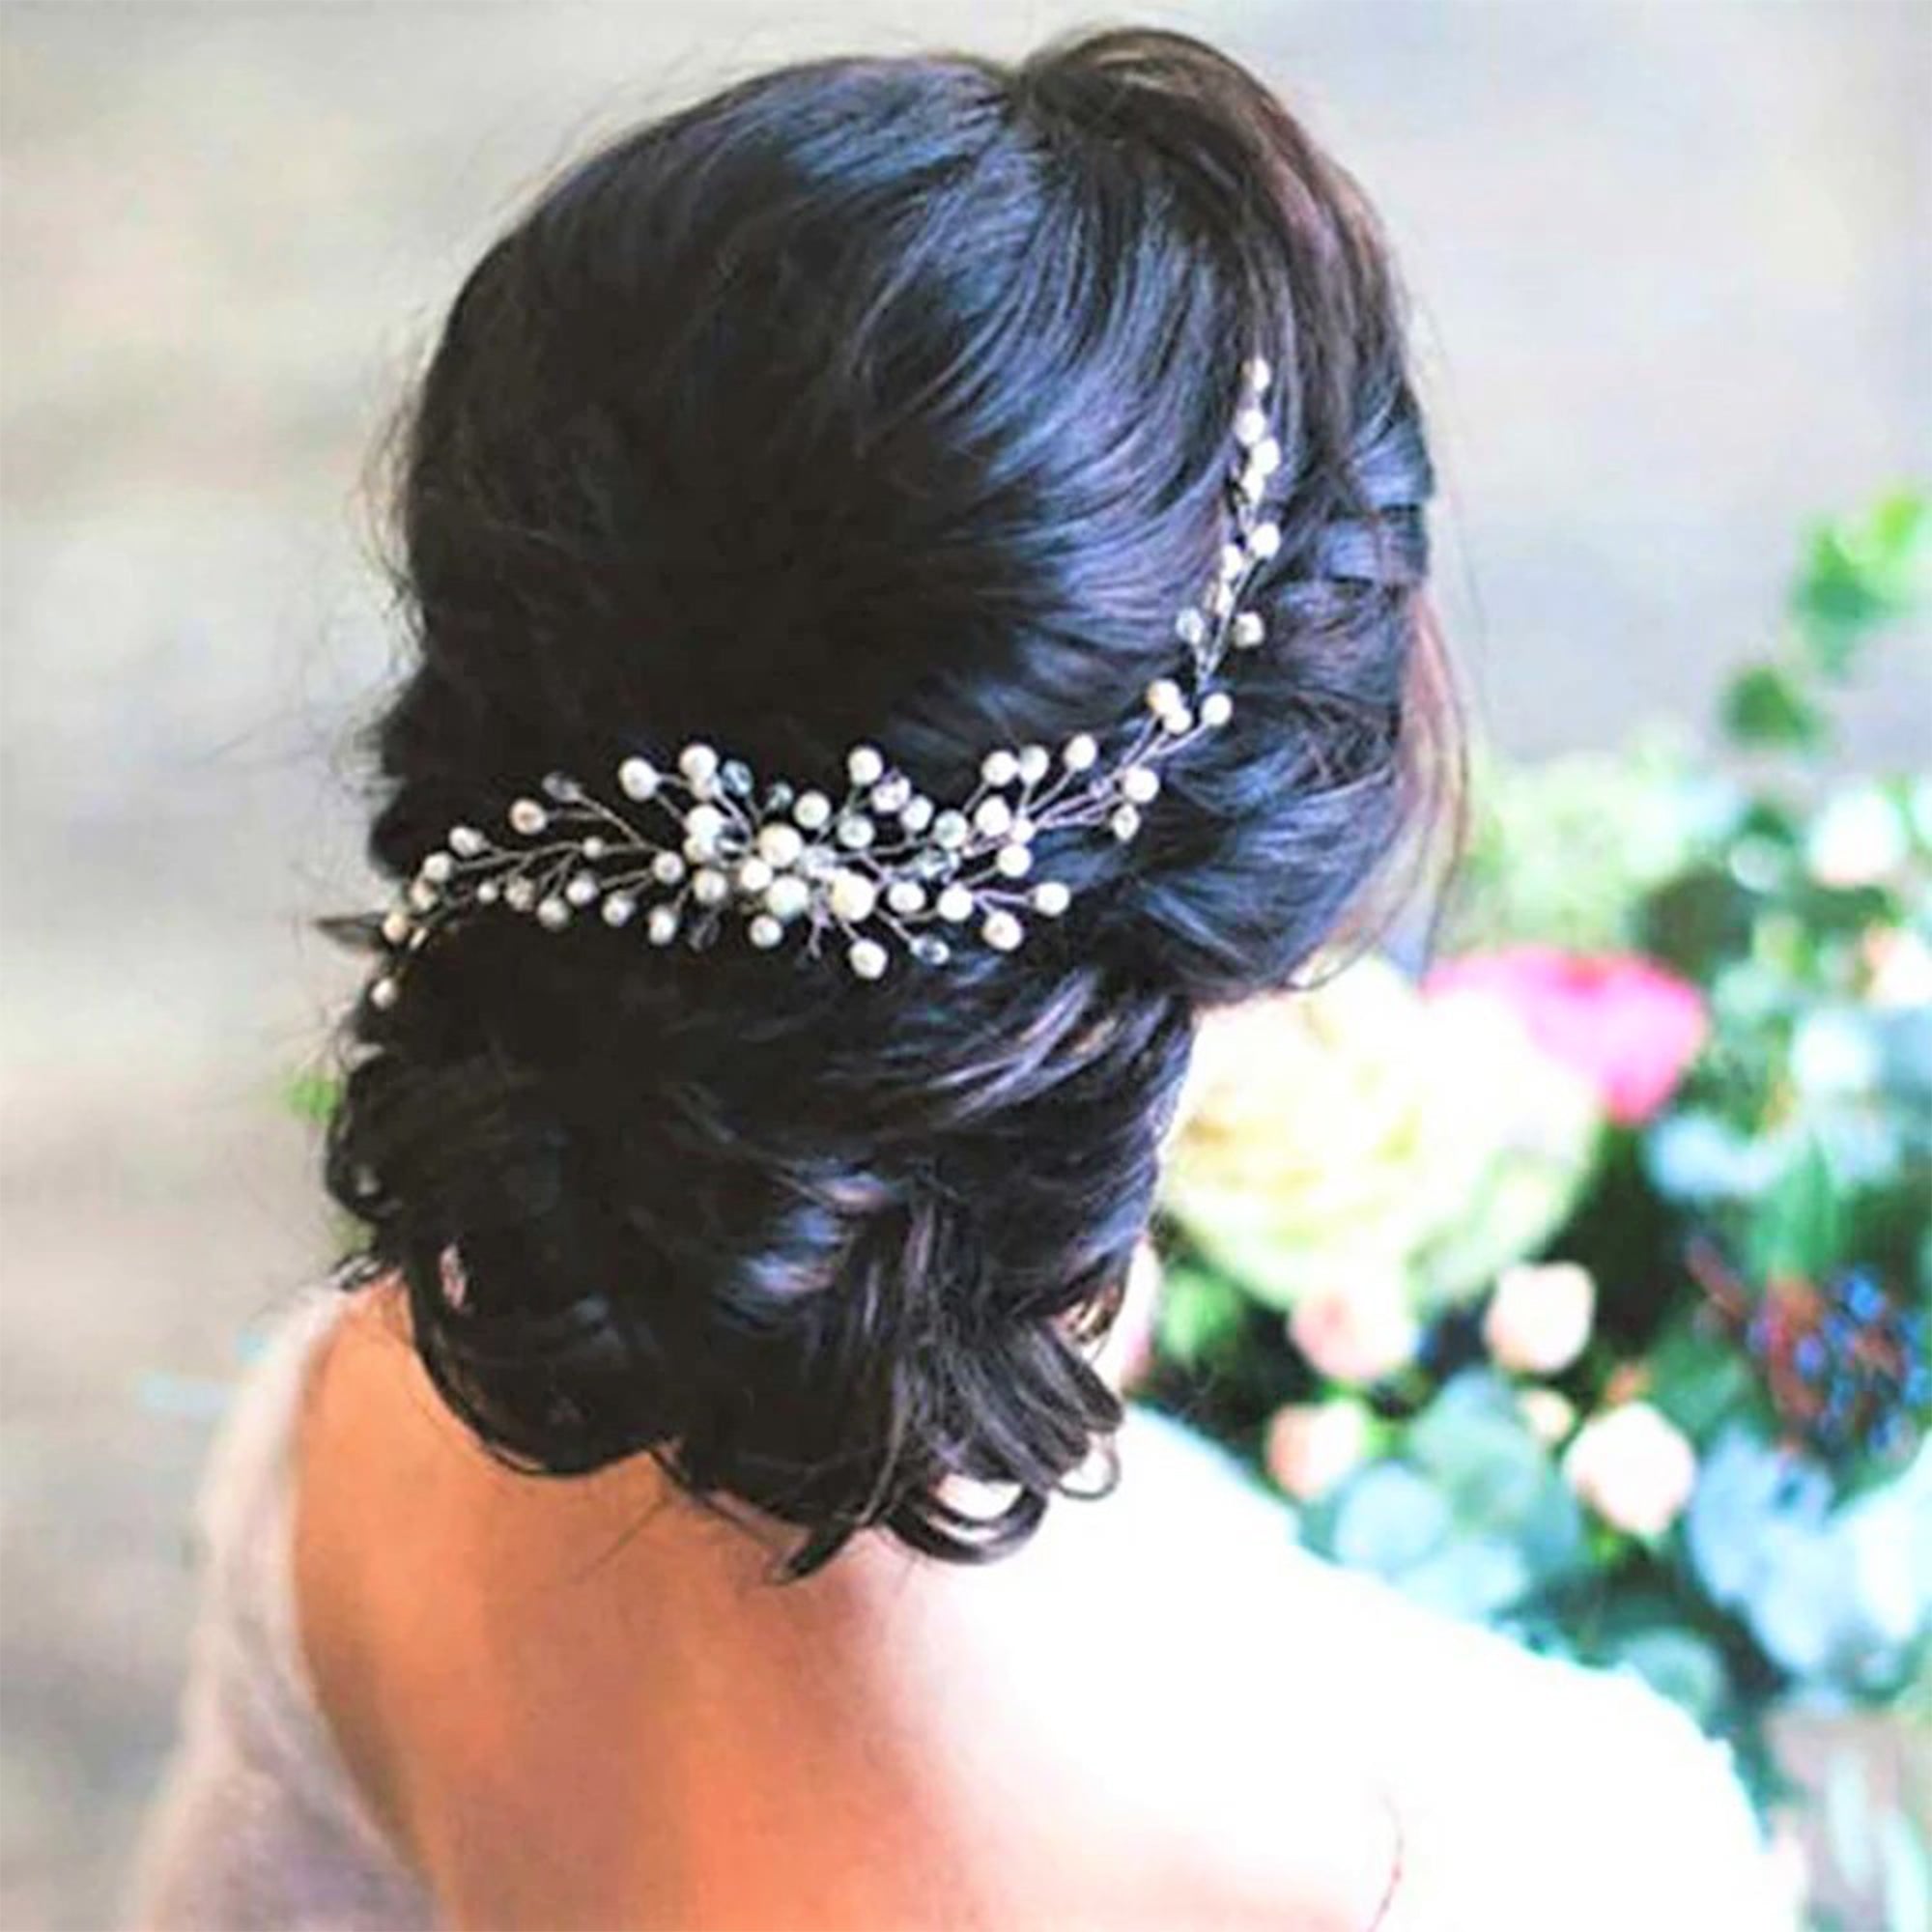 Bridal Hair Piece with Pearls and Crystals